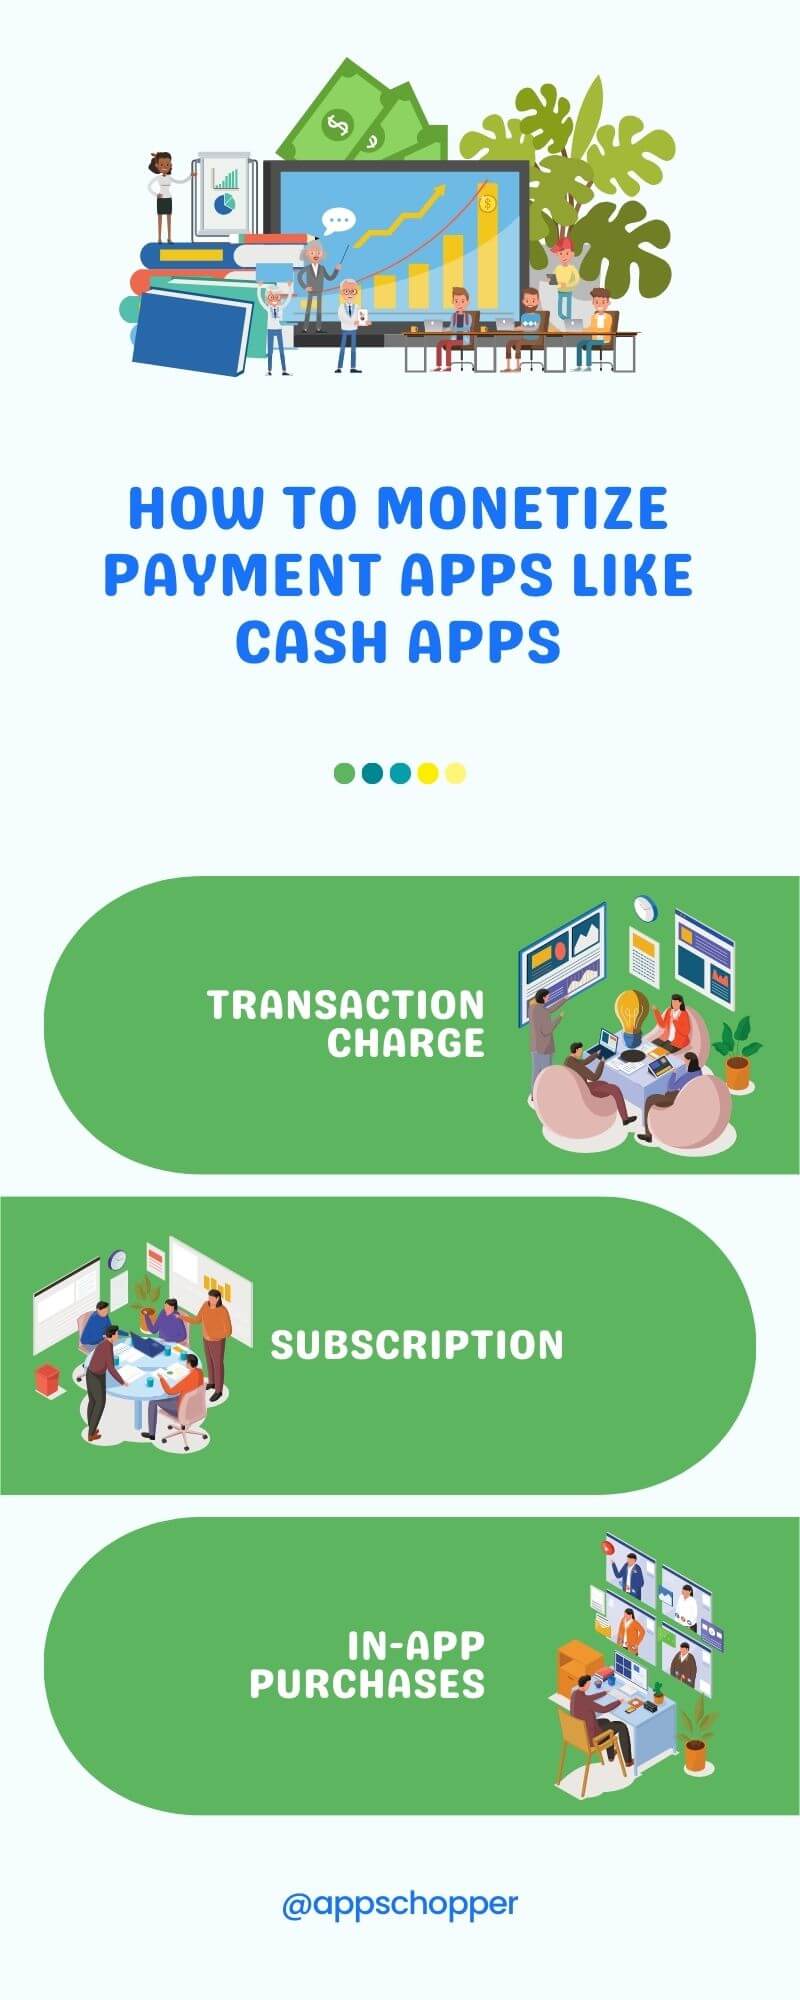  How to Monetize Payment Apps Like Cash Apps